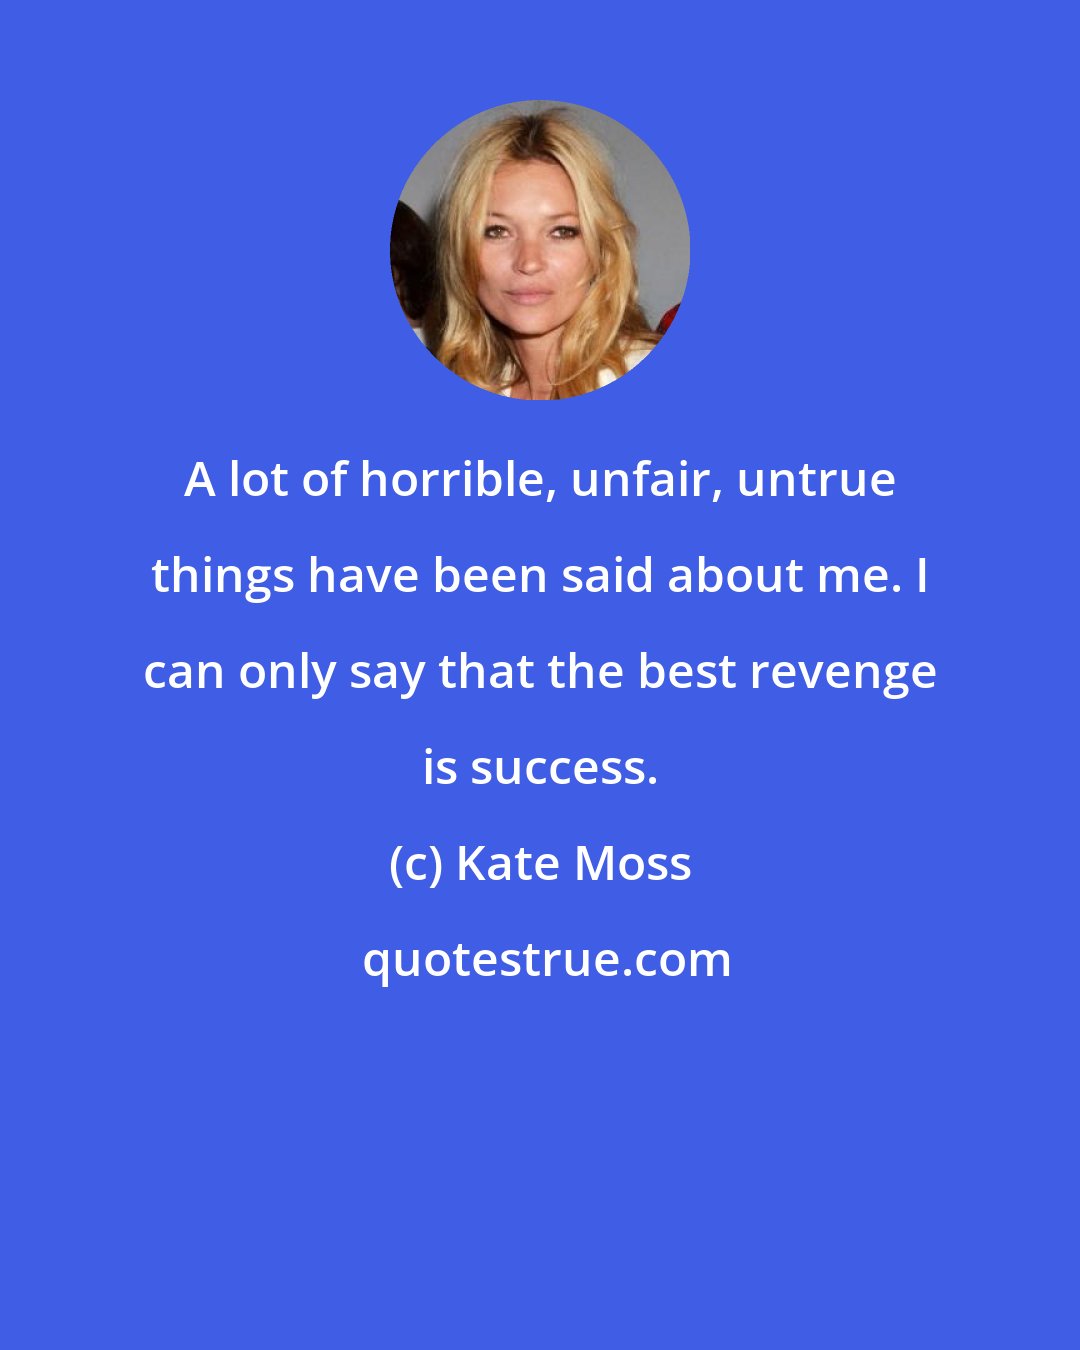 Kate Moss: A lot of horrible, unfair, untrue things have been said about me. I can only say that the best revenge is success.